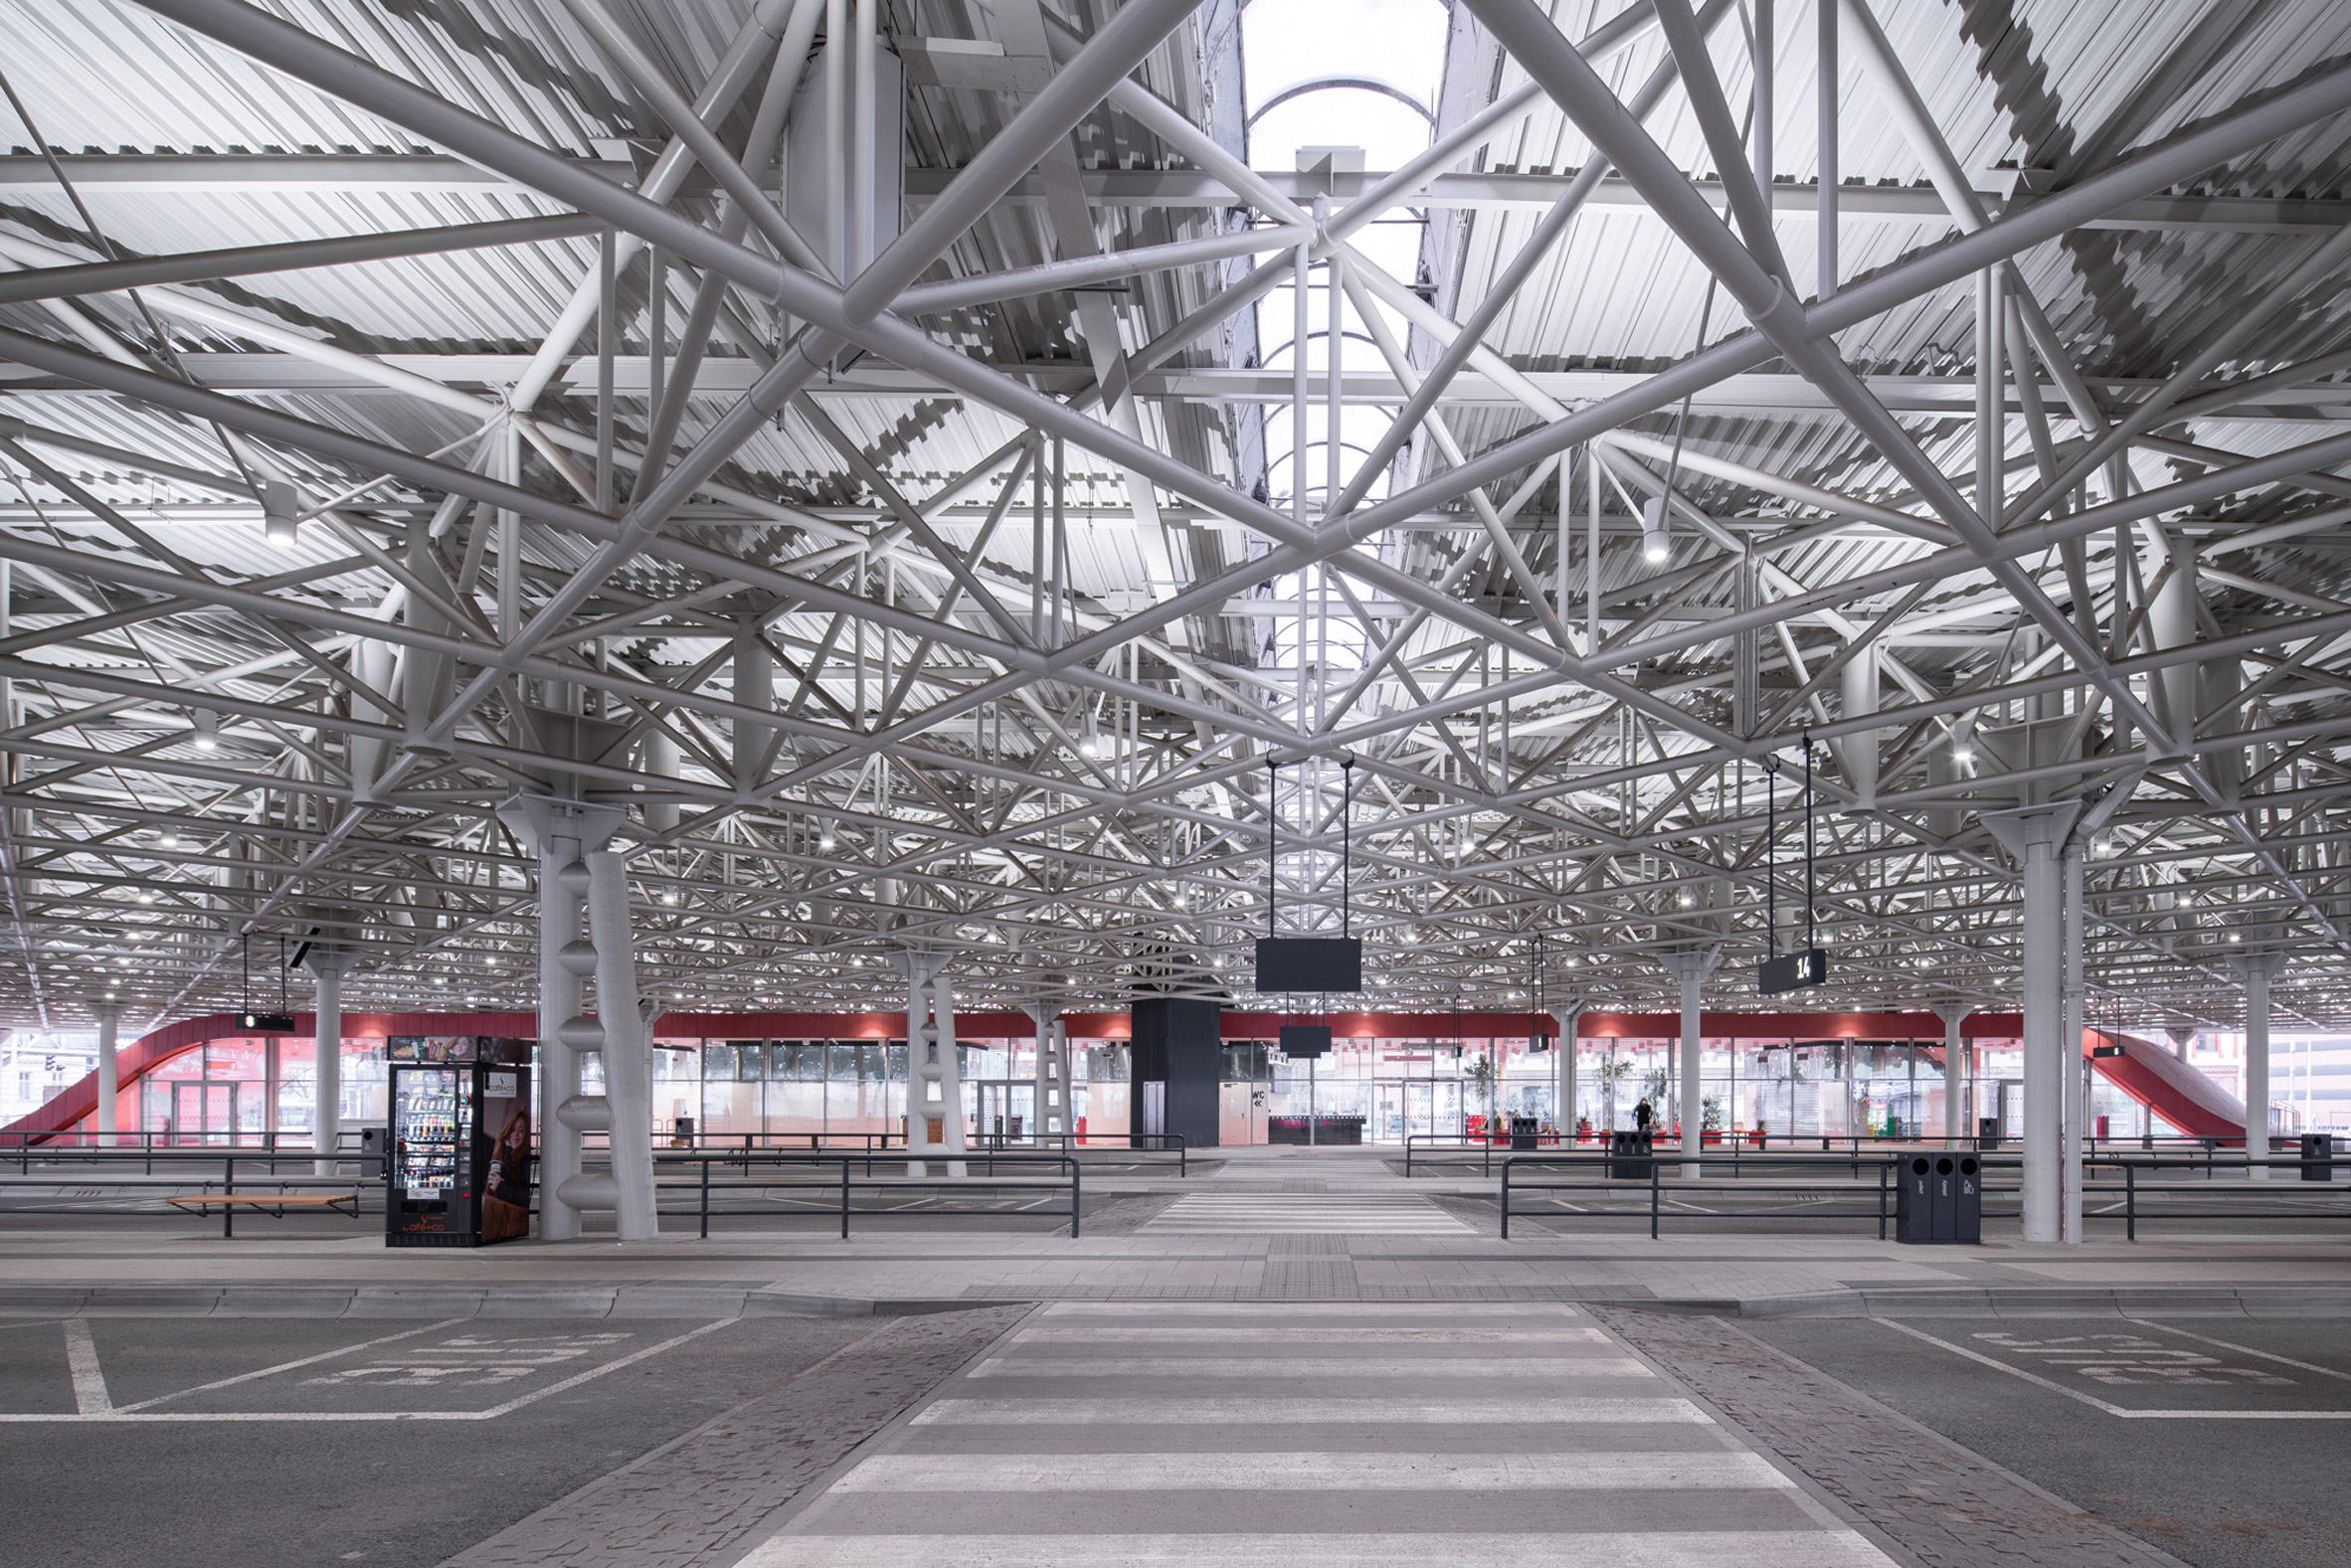 The bus terminal waiting area has a red finish by Chybik + Kristof